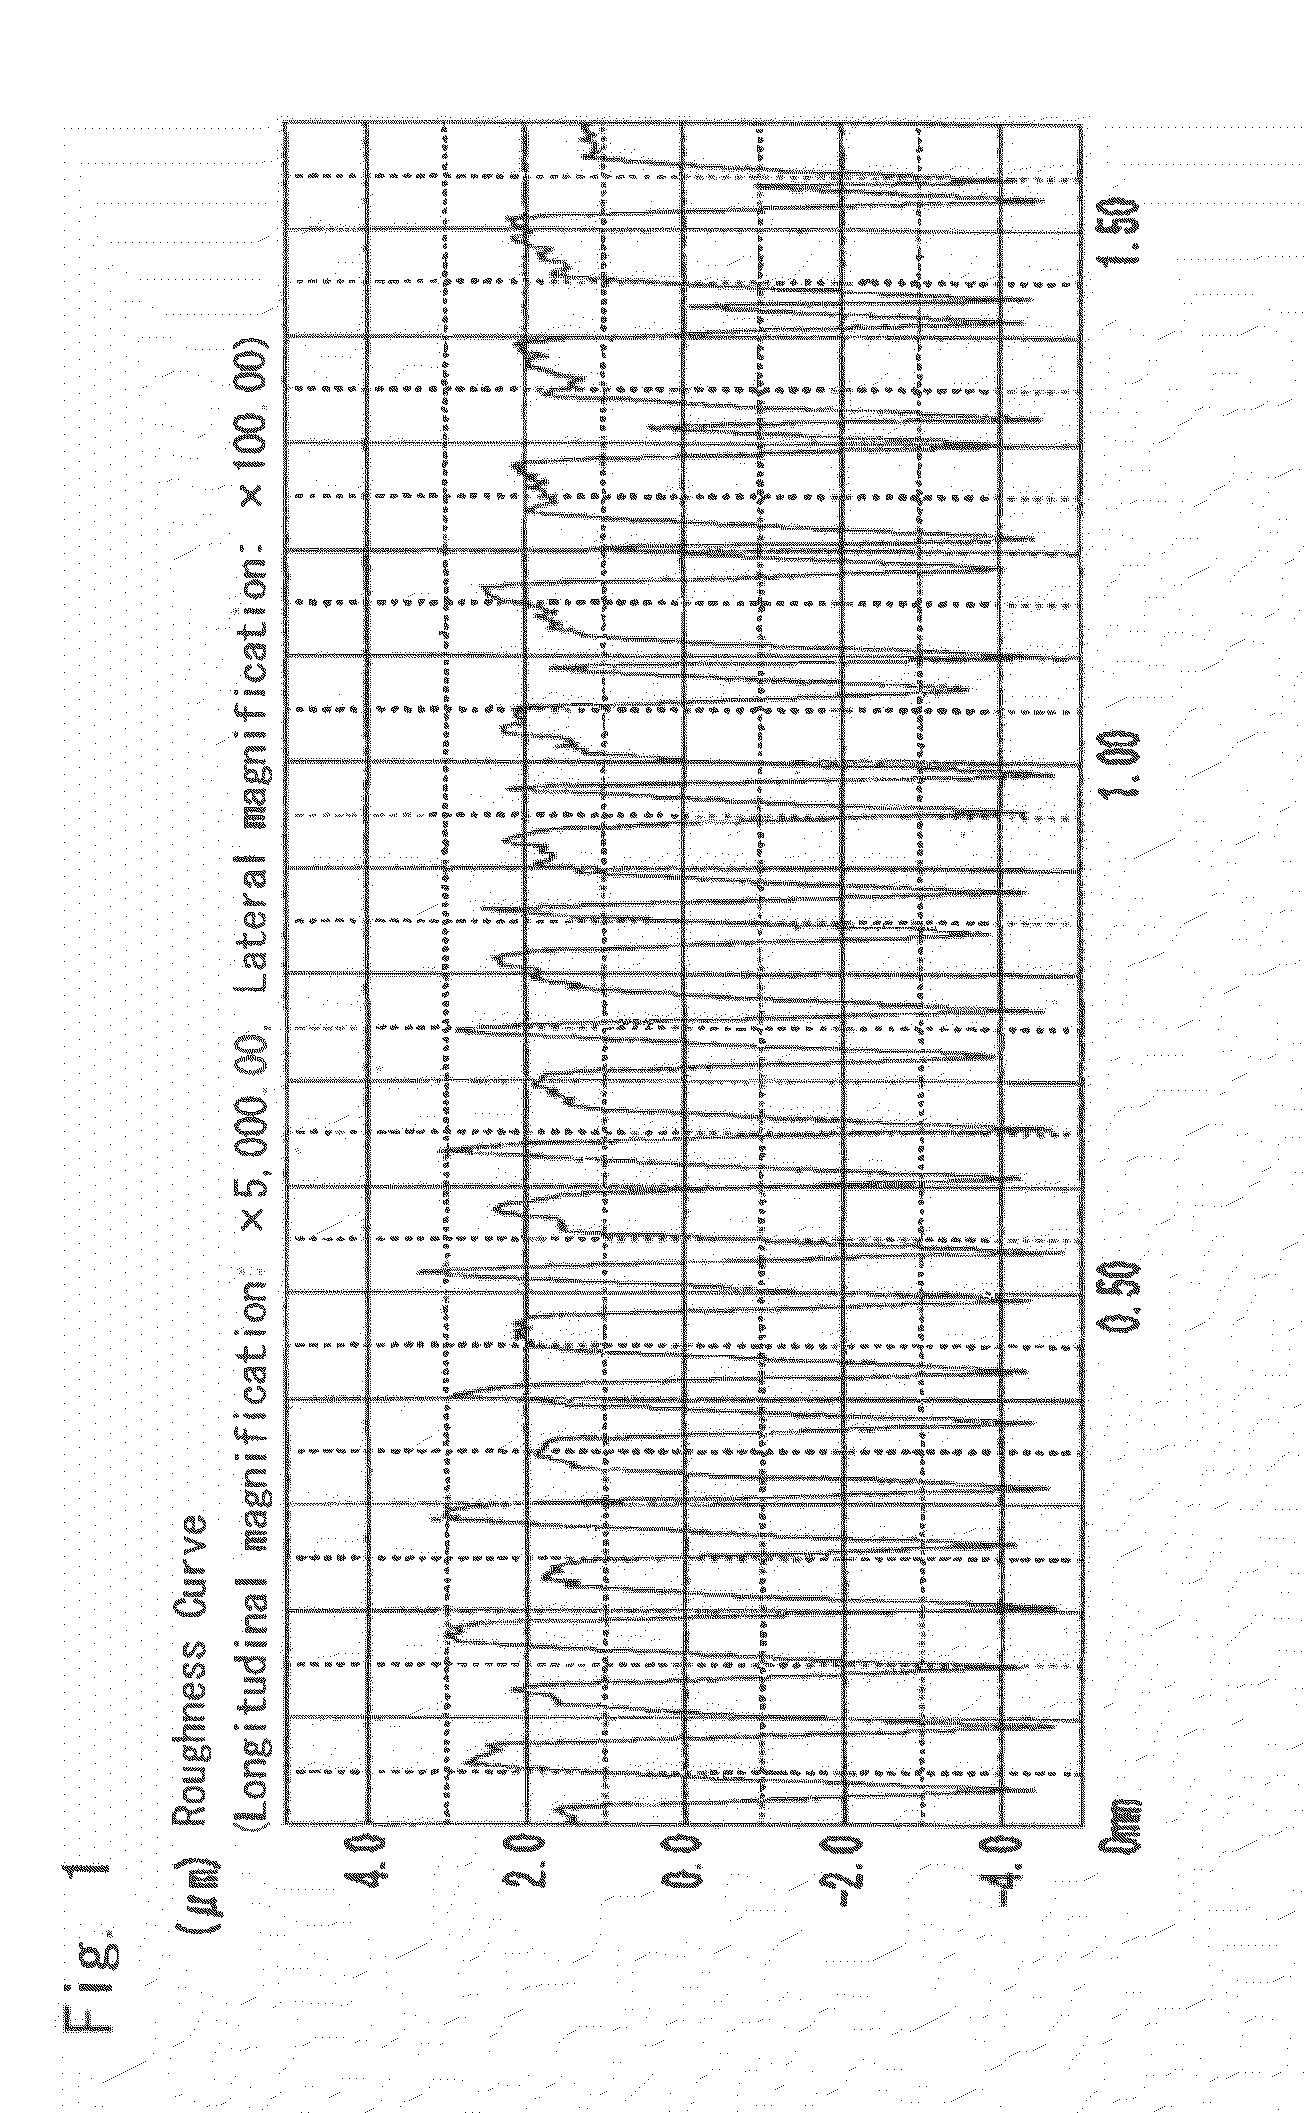 Copper alloy and electrically conductive material for connecting parts, and mating-type connecting part and method for producing the same